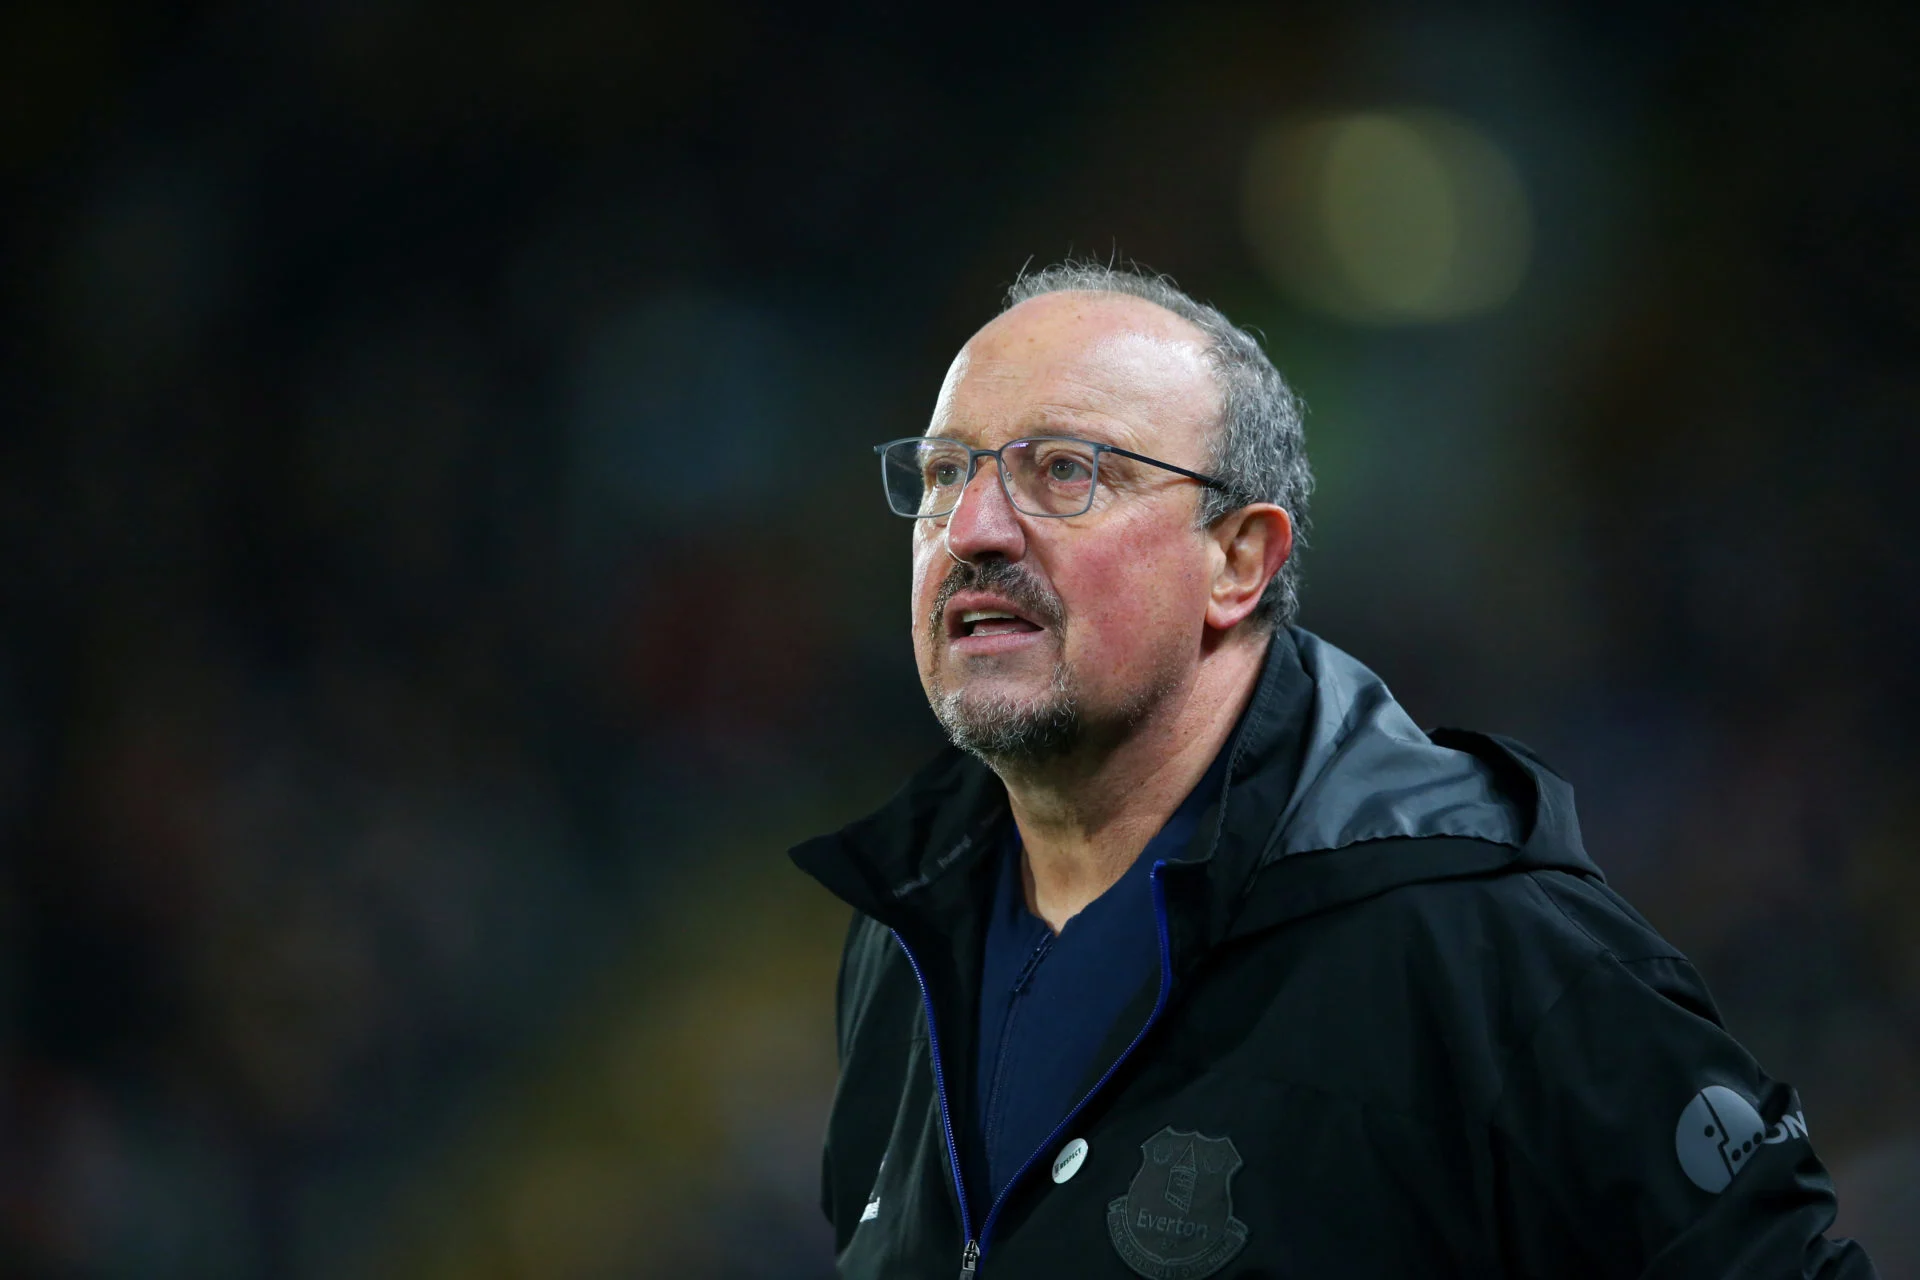 Rafa Benitez has clear ideas about which team will come out on top in Tuesday’s encounter between Napoli and Milan in Champions League.